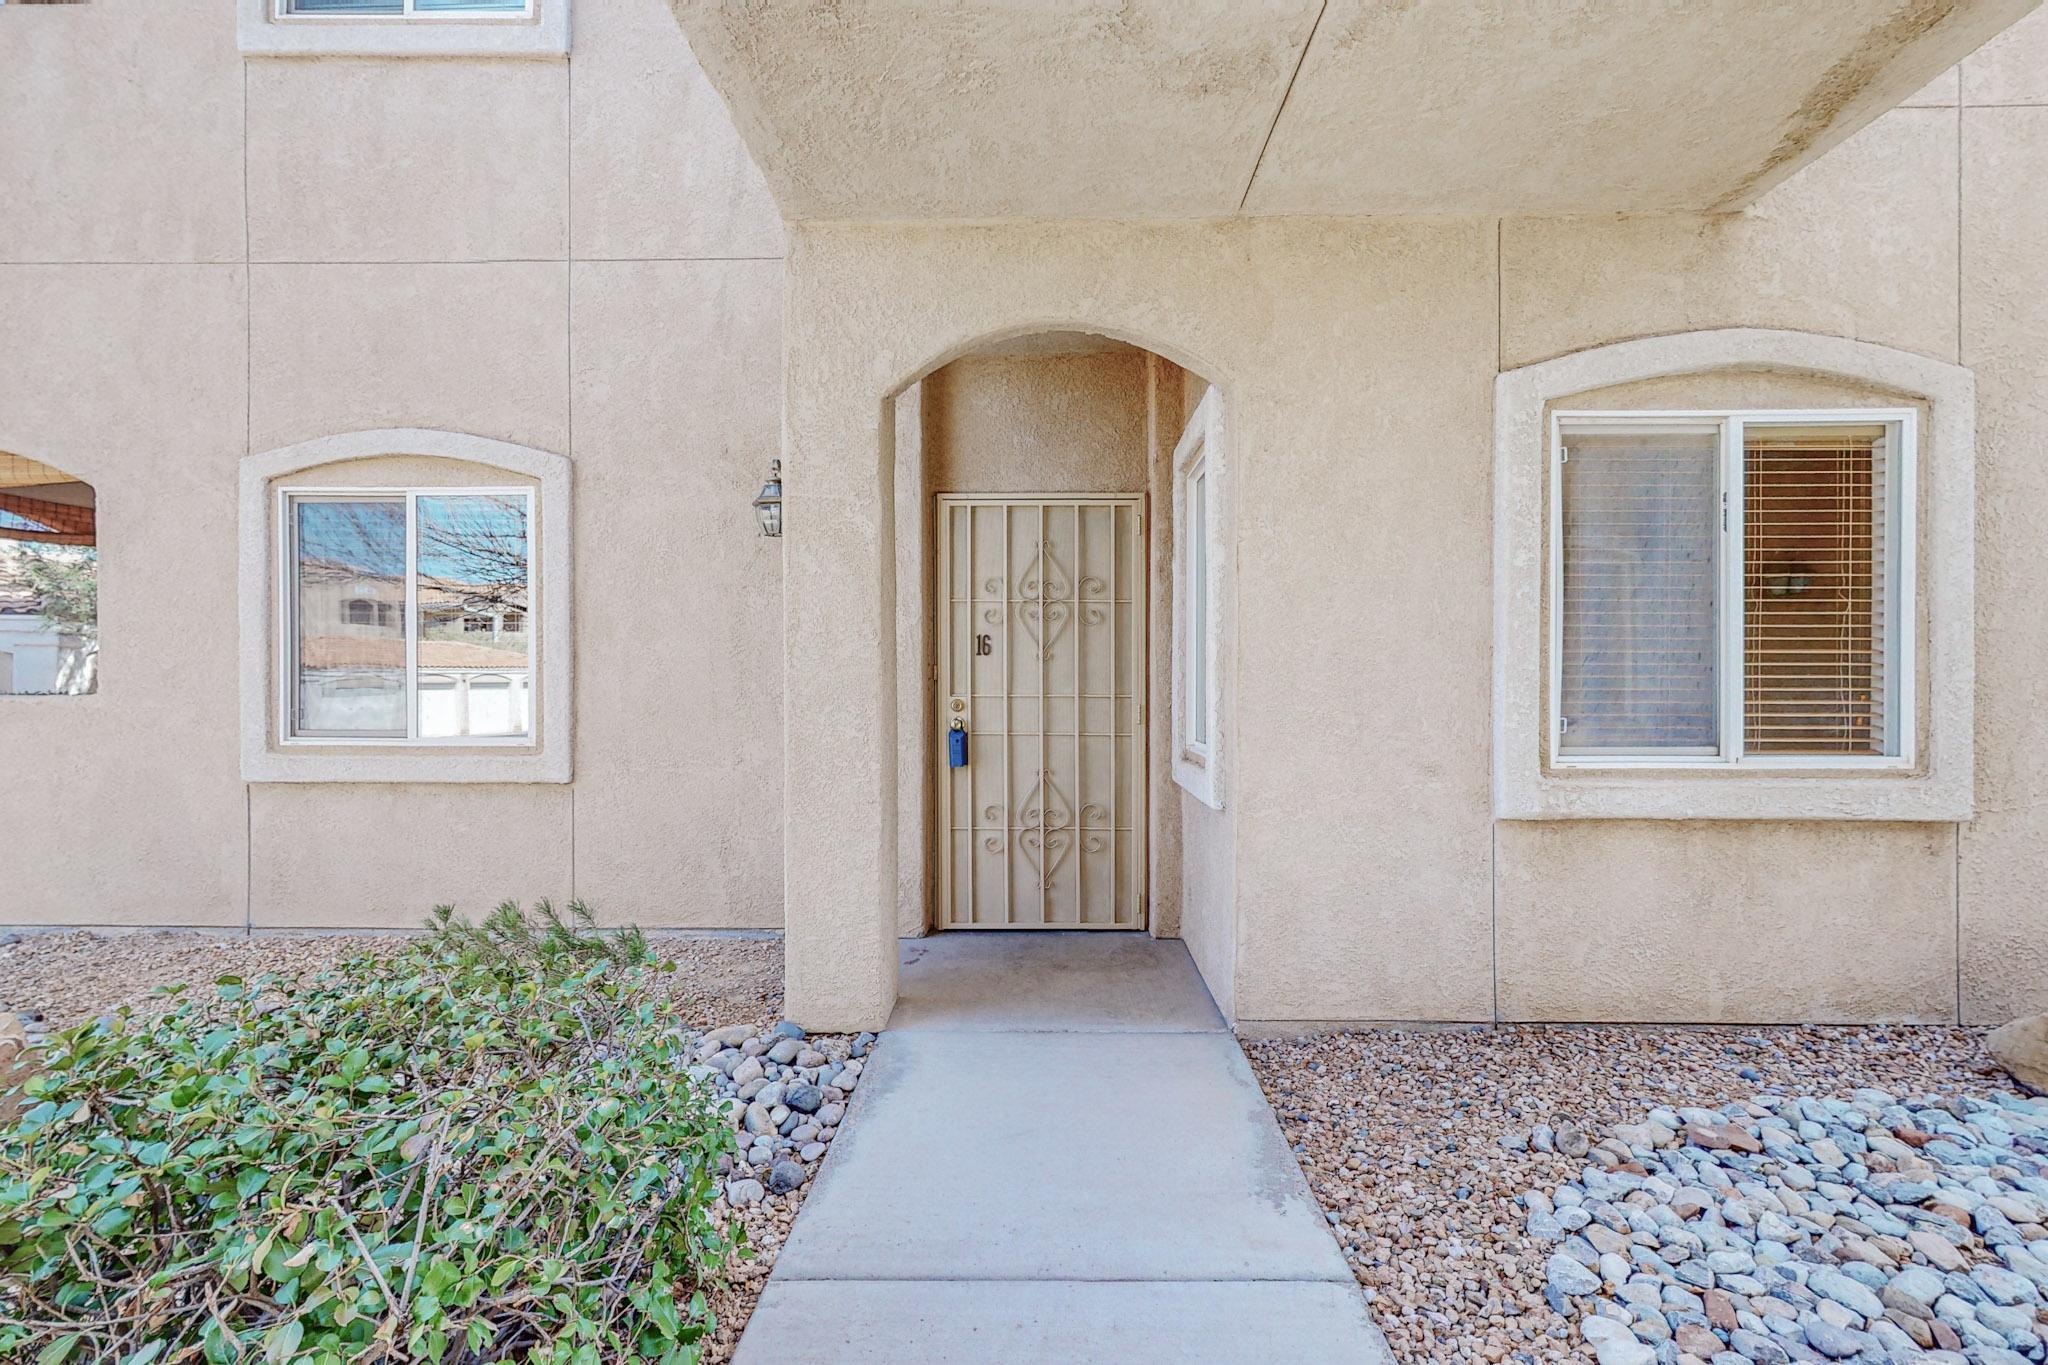 Welcome home to the beautiful  gated Rancho Mirage Community! Located within the desirable Vista del Norte homes with tons of beautiful landscape, surrounded by 3 parks and tons of walkable routes. Centrally located, close to Paseo del Norte and quick access to i25. This condo has a clubhouse, community pool, dedicated parking spot and even a single detached garage!